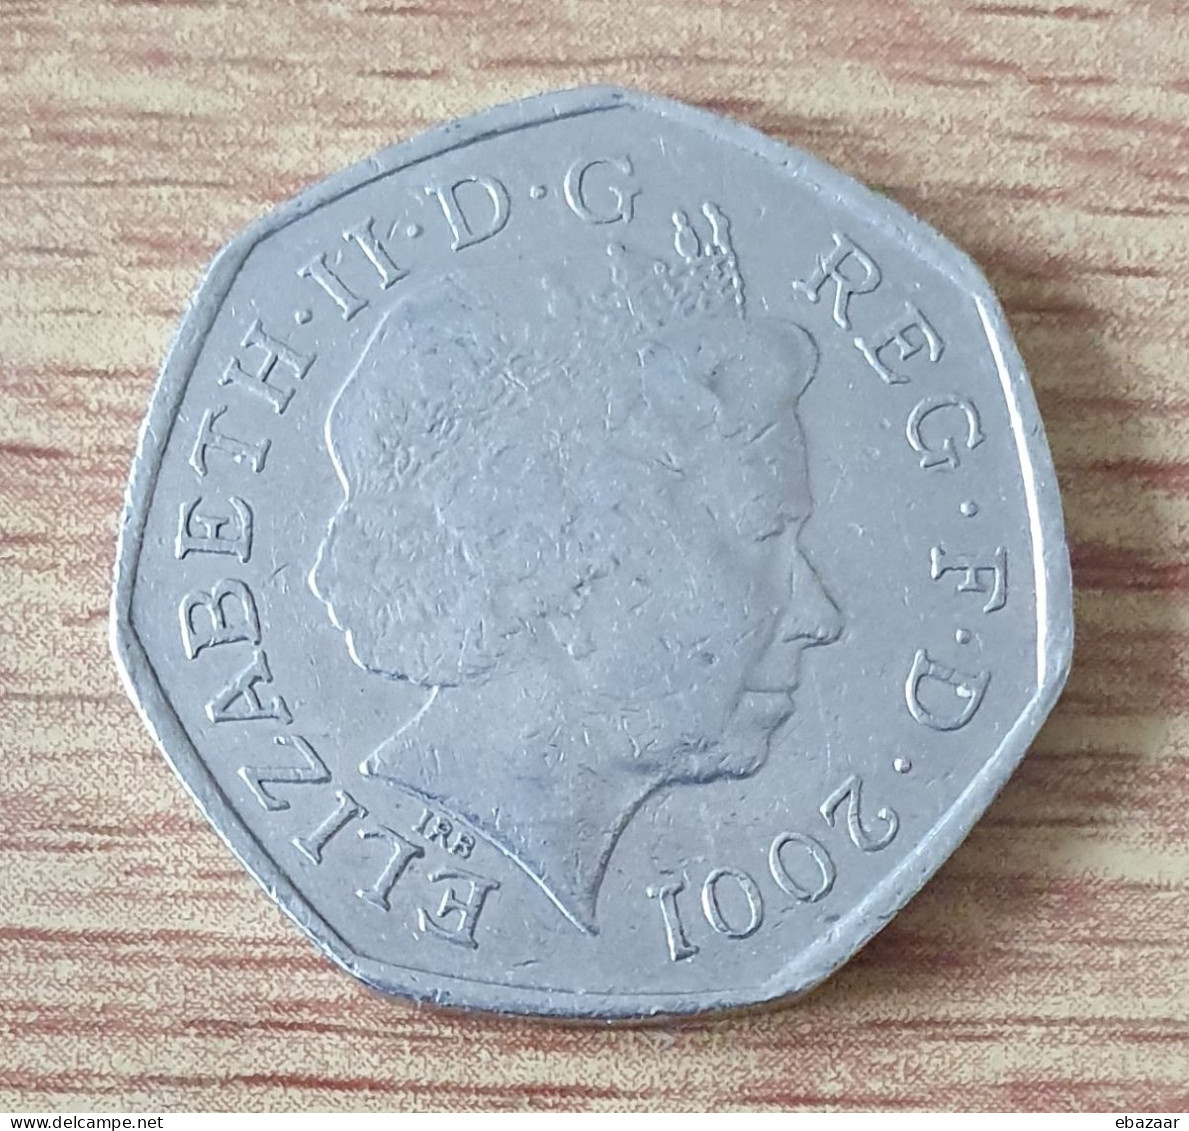 Great Britain 2001 United Kingdom Of England H.M. Queen Elizabeth II - Fifty 50 Pence Coin UK GB - 50 Pence